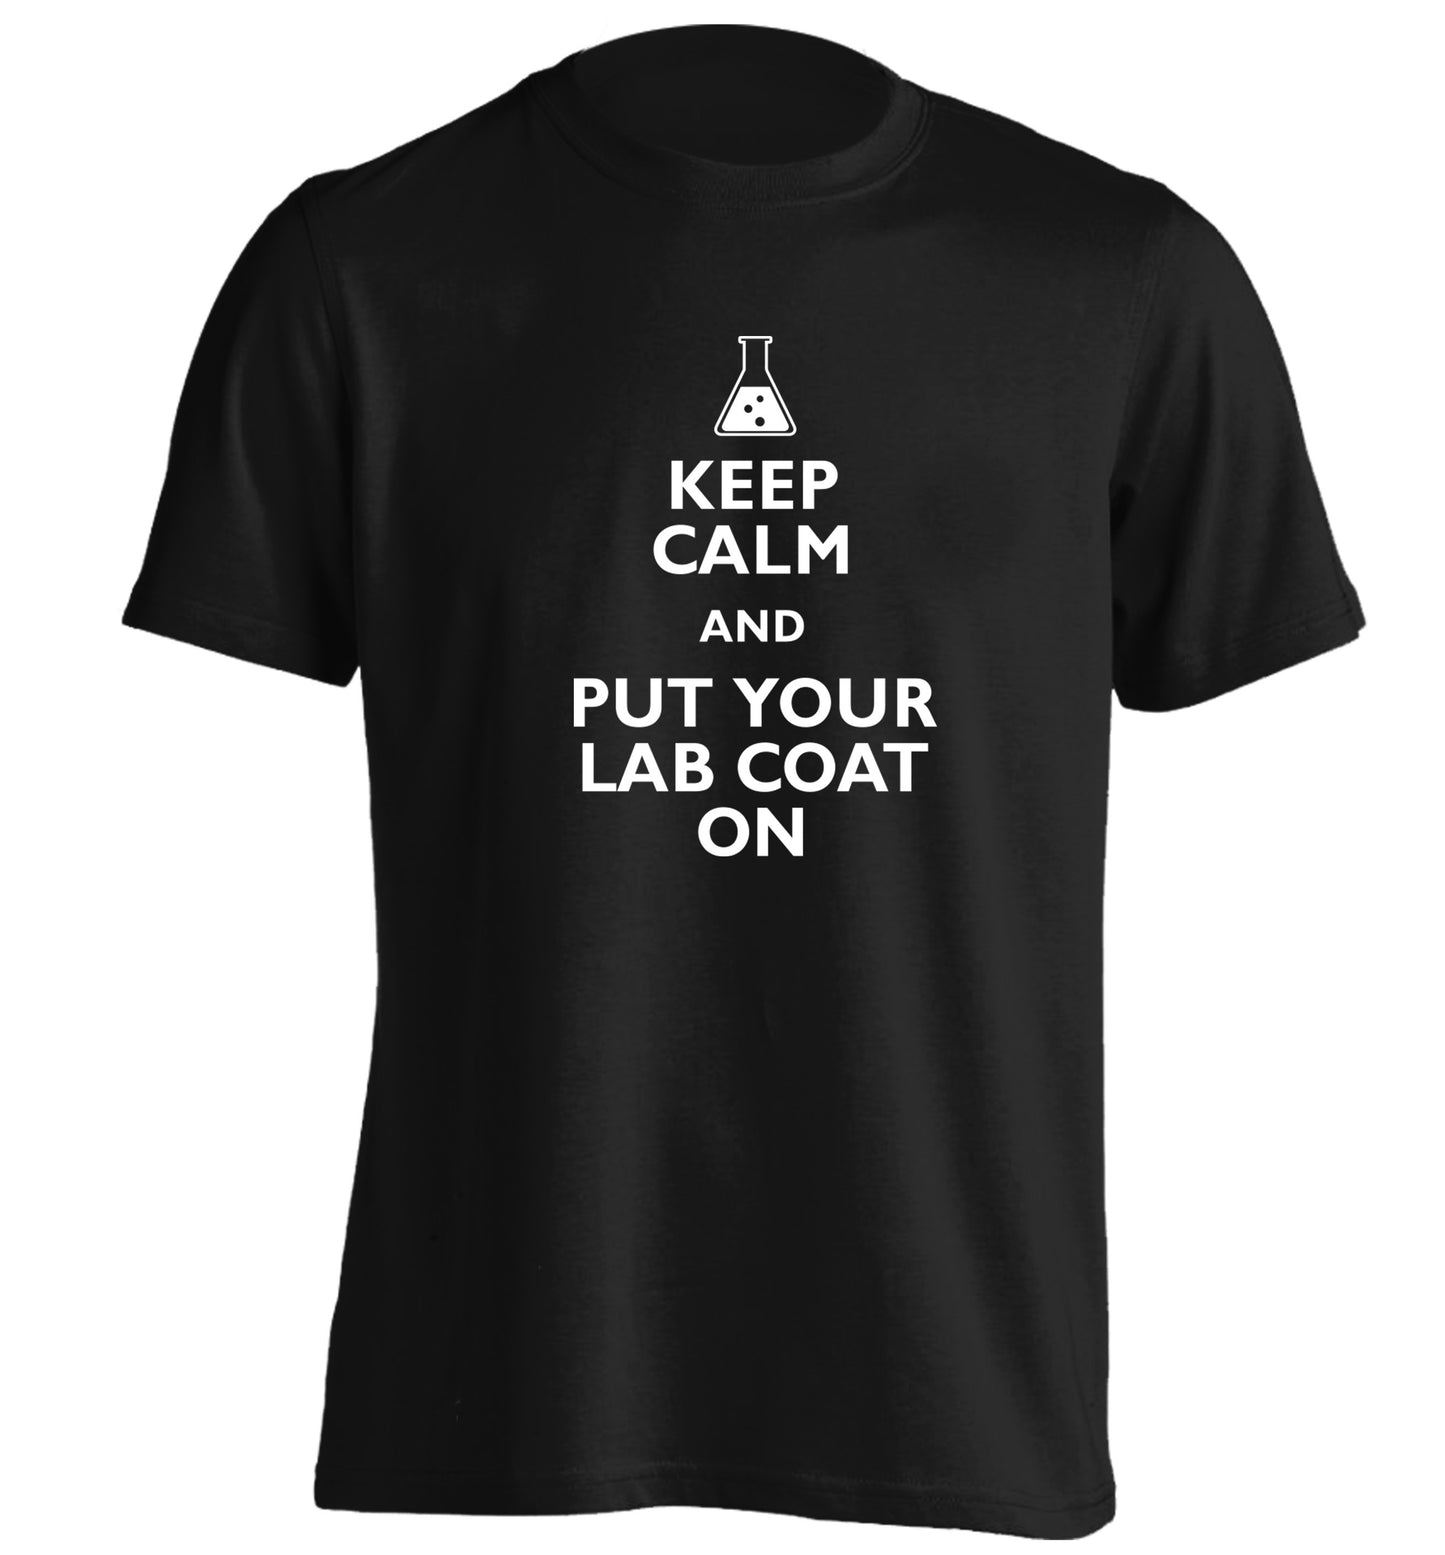 Keep calm and put your lab coat on adults unisex black Tshirt 2XL